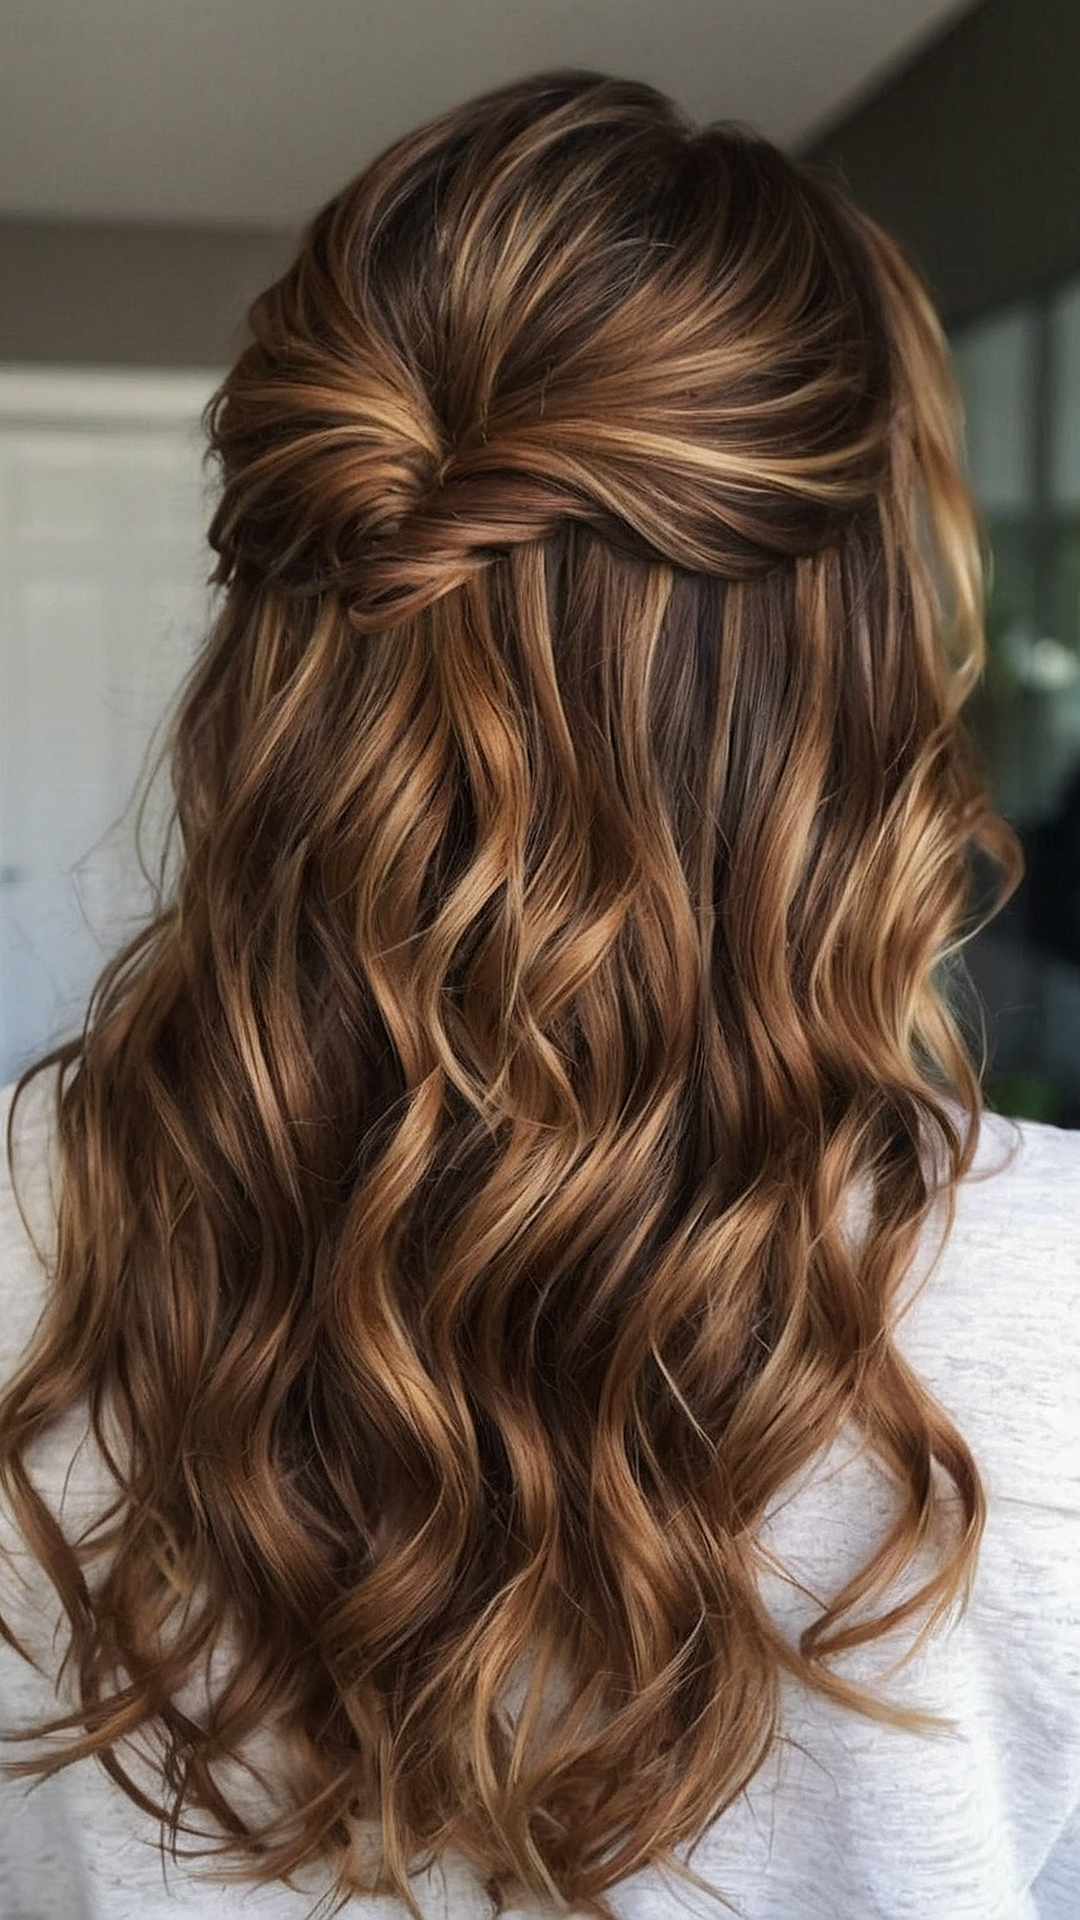 Sway with the Waves: Wavy Hair Inspiration for All